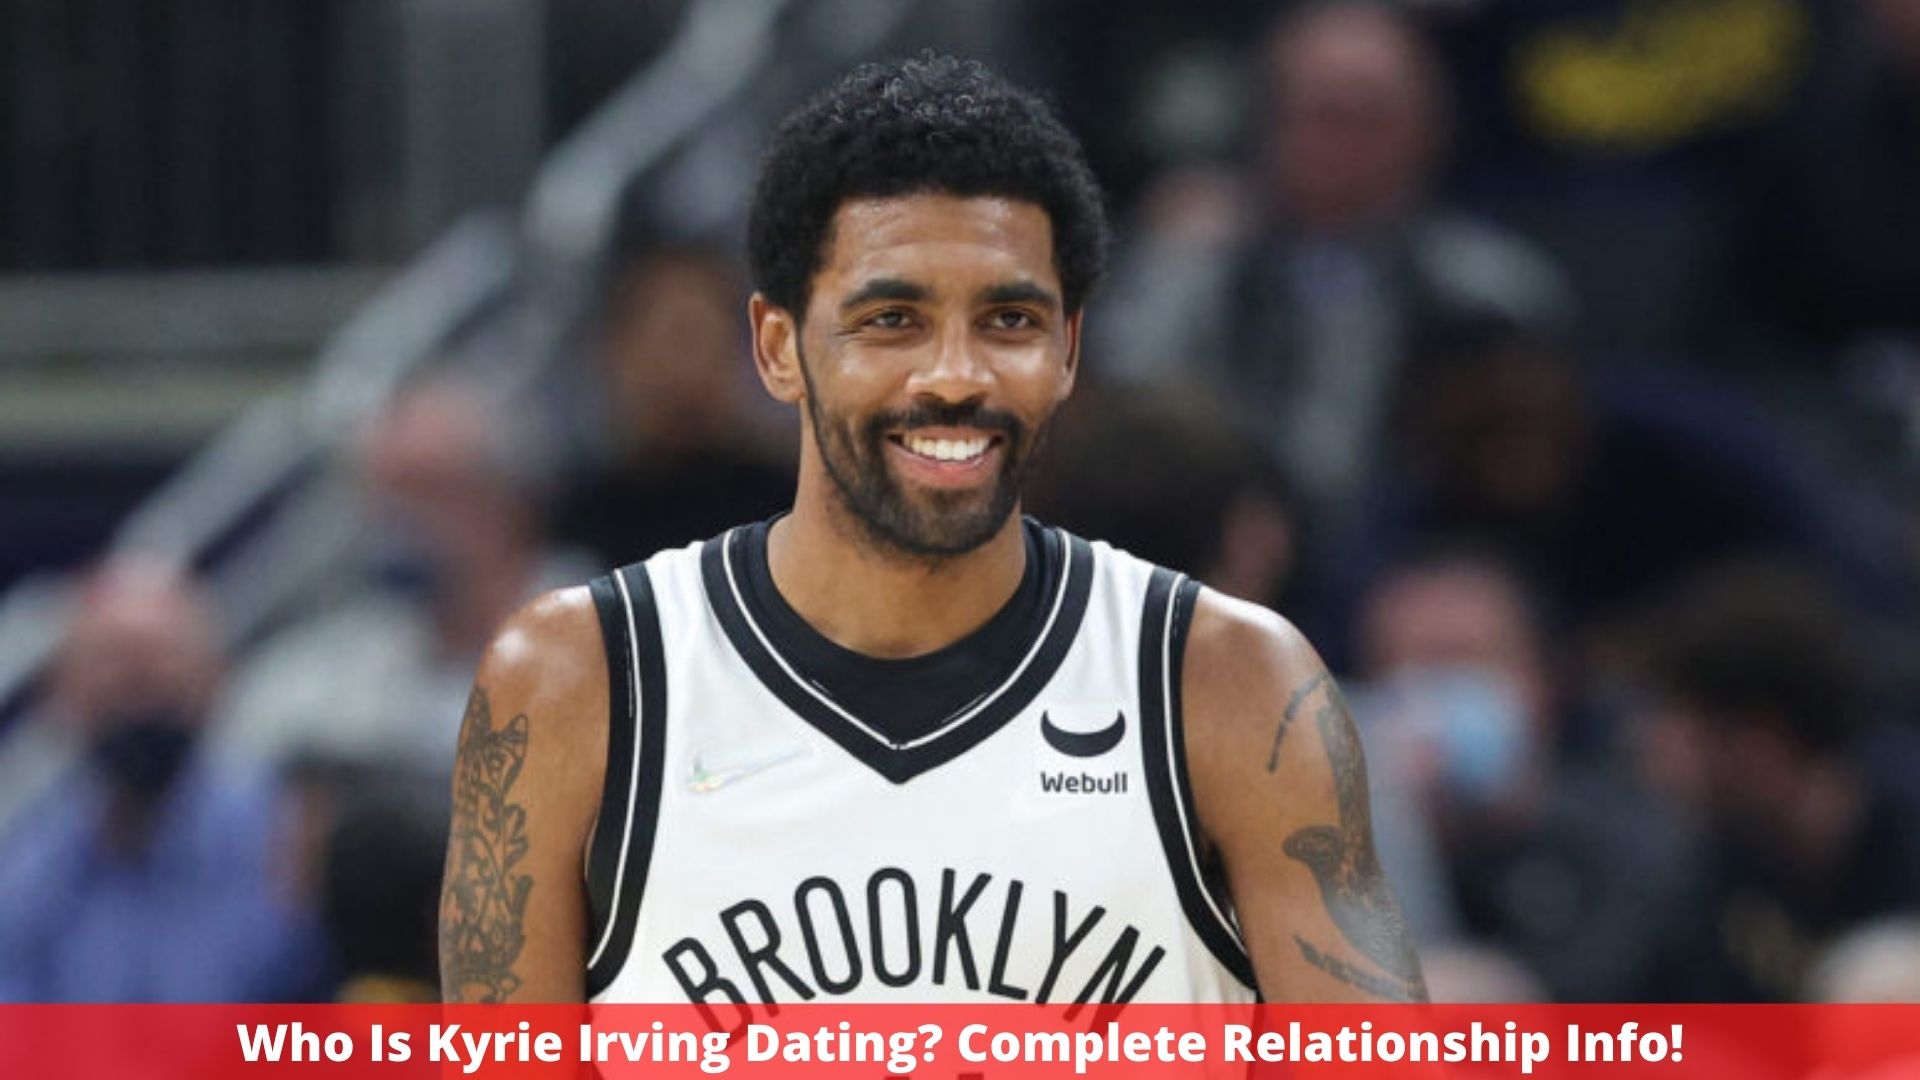 Who Is Kyrie Irving Dating? Complete Relationship Info!